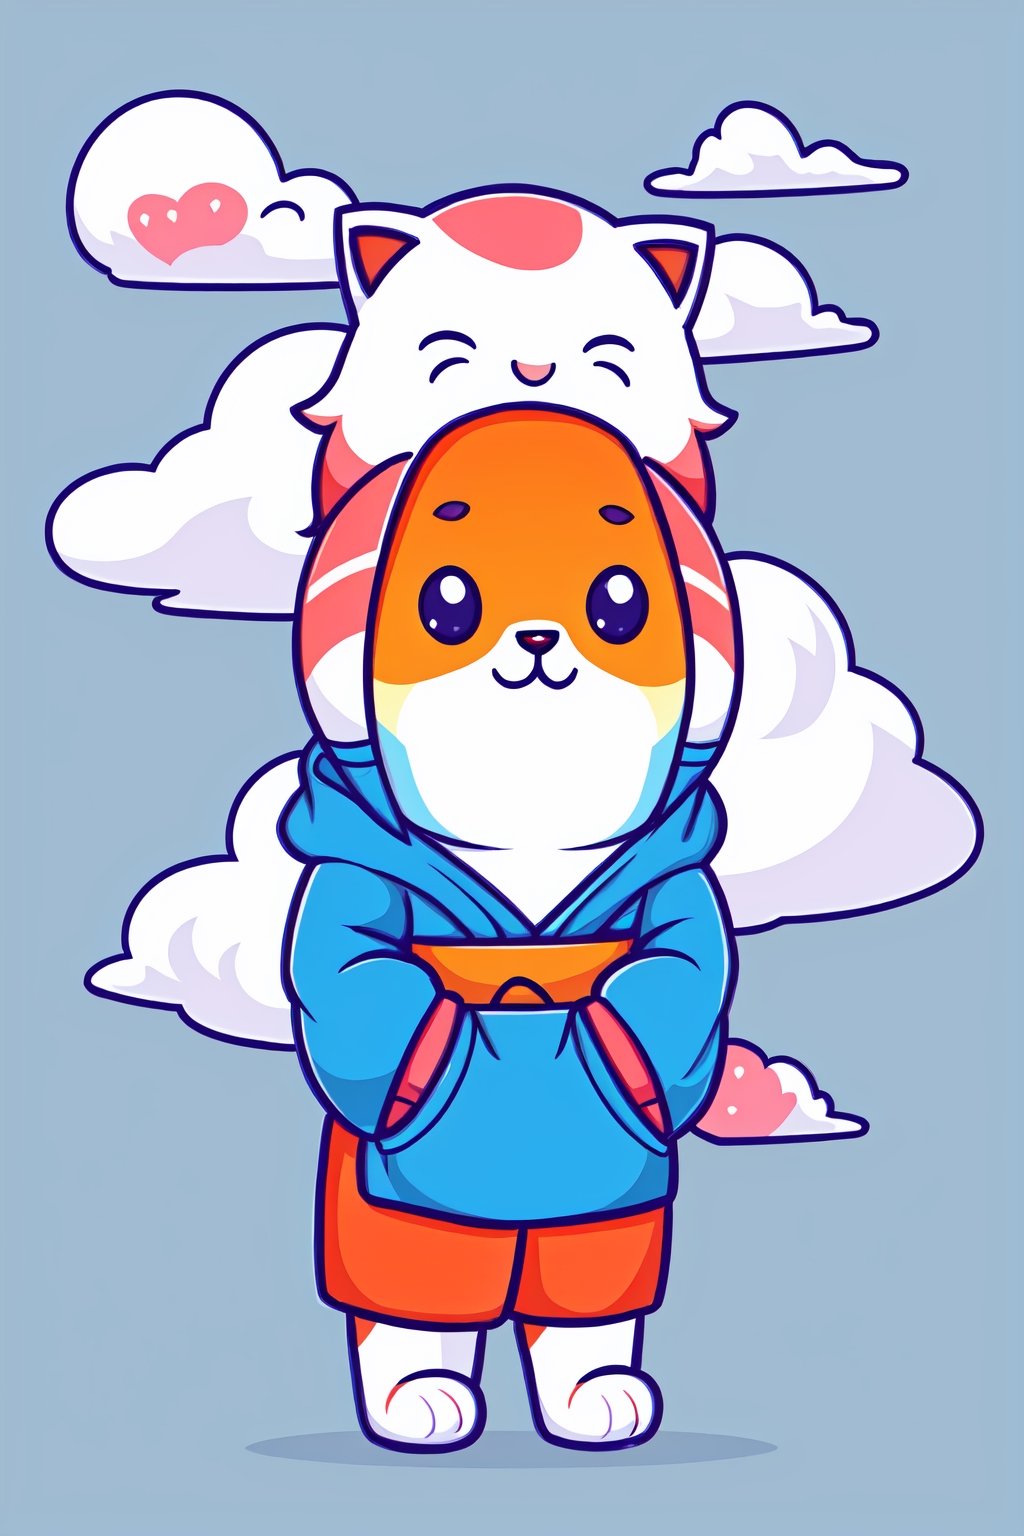 style of Cathleen McAllister, a cute cat, on clouds, cold colors, simple  background, Illustration, japan, minimalistic, cutestickers